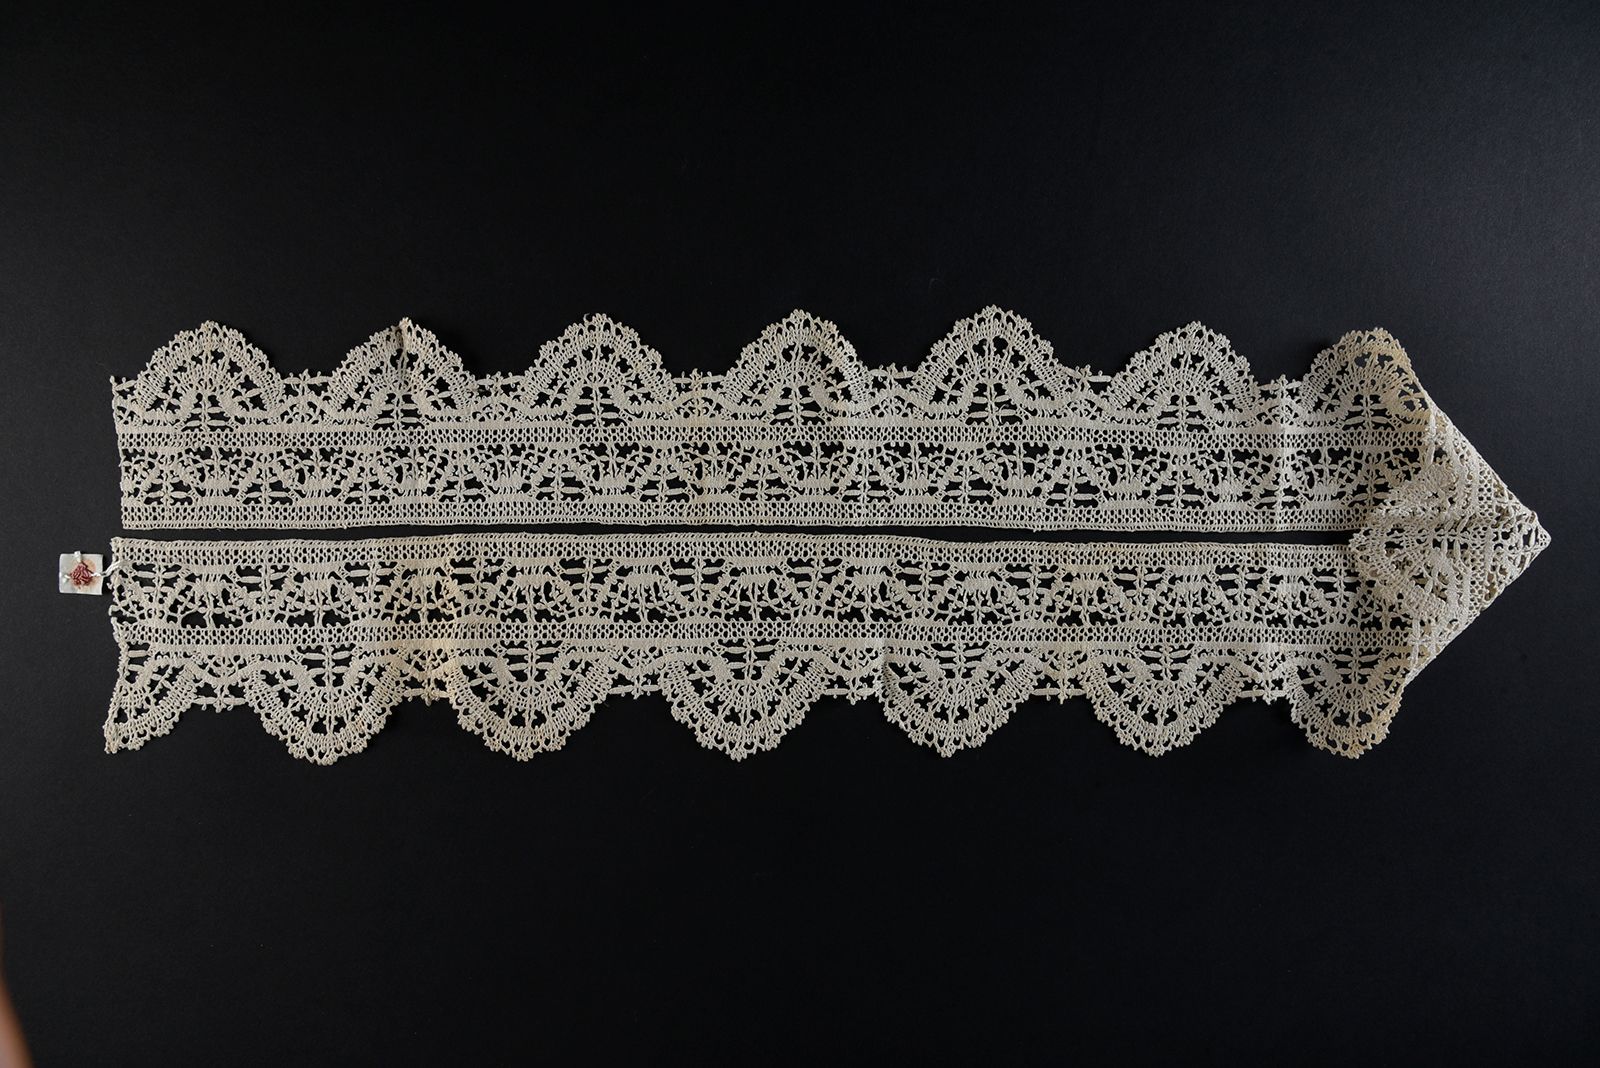 Null Spindle lace border, Genoa or Milan, circa 1620-30.

Beautiful and large la&hellip;